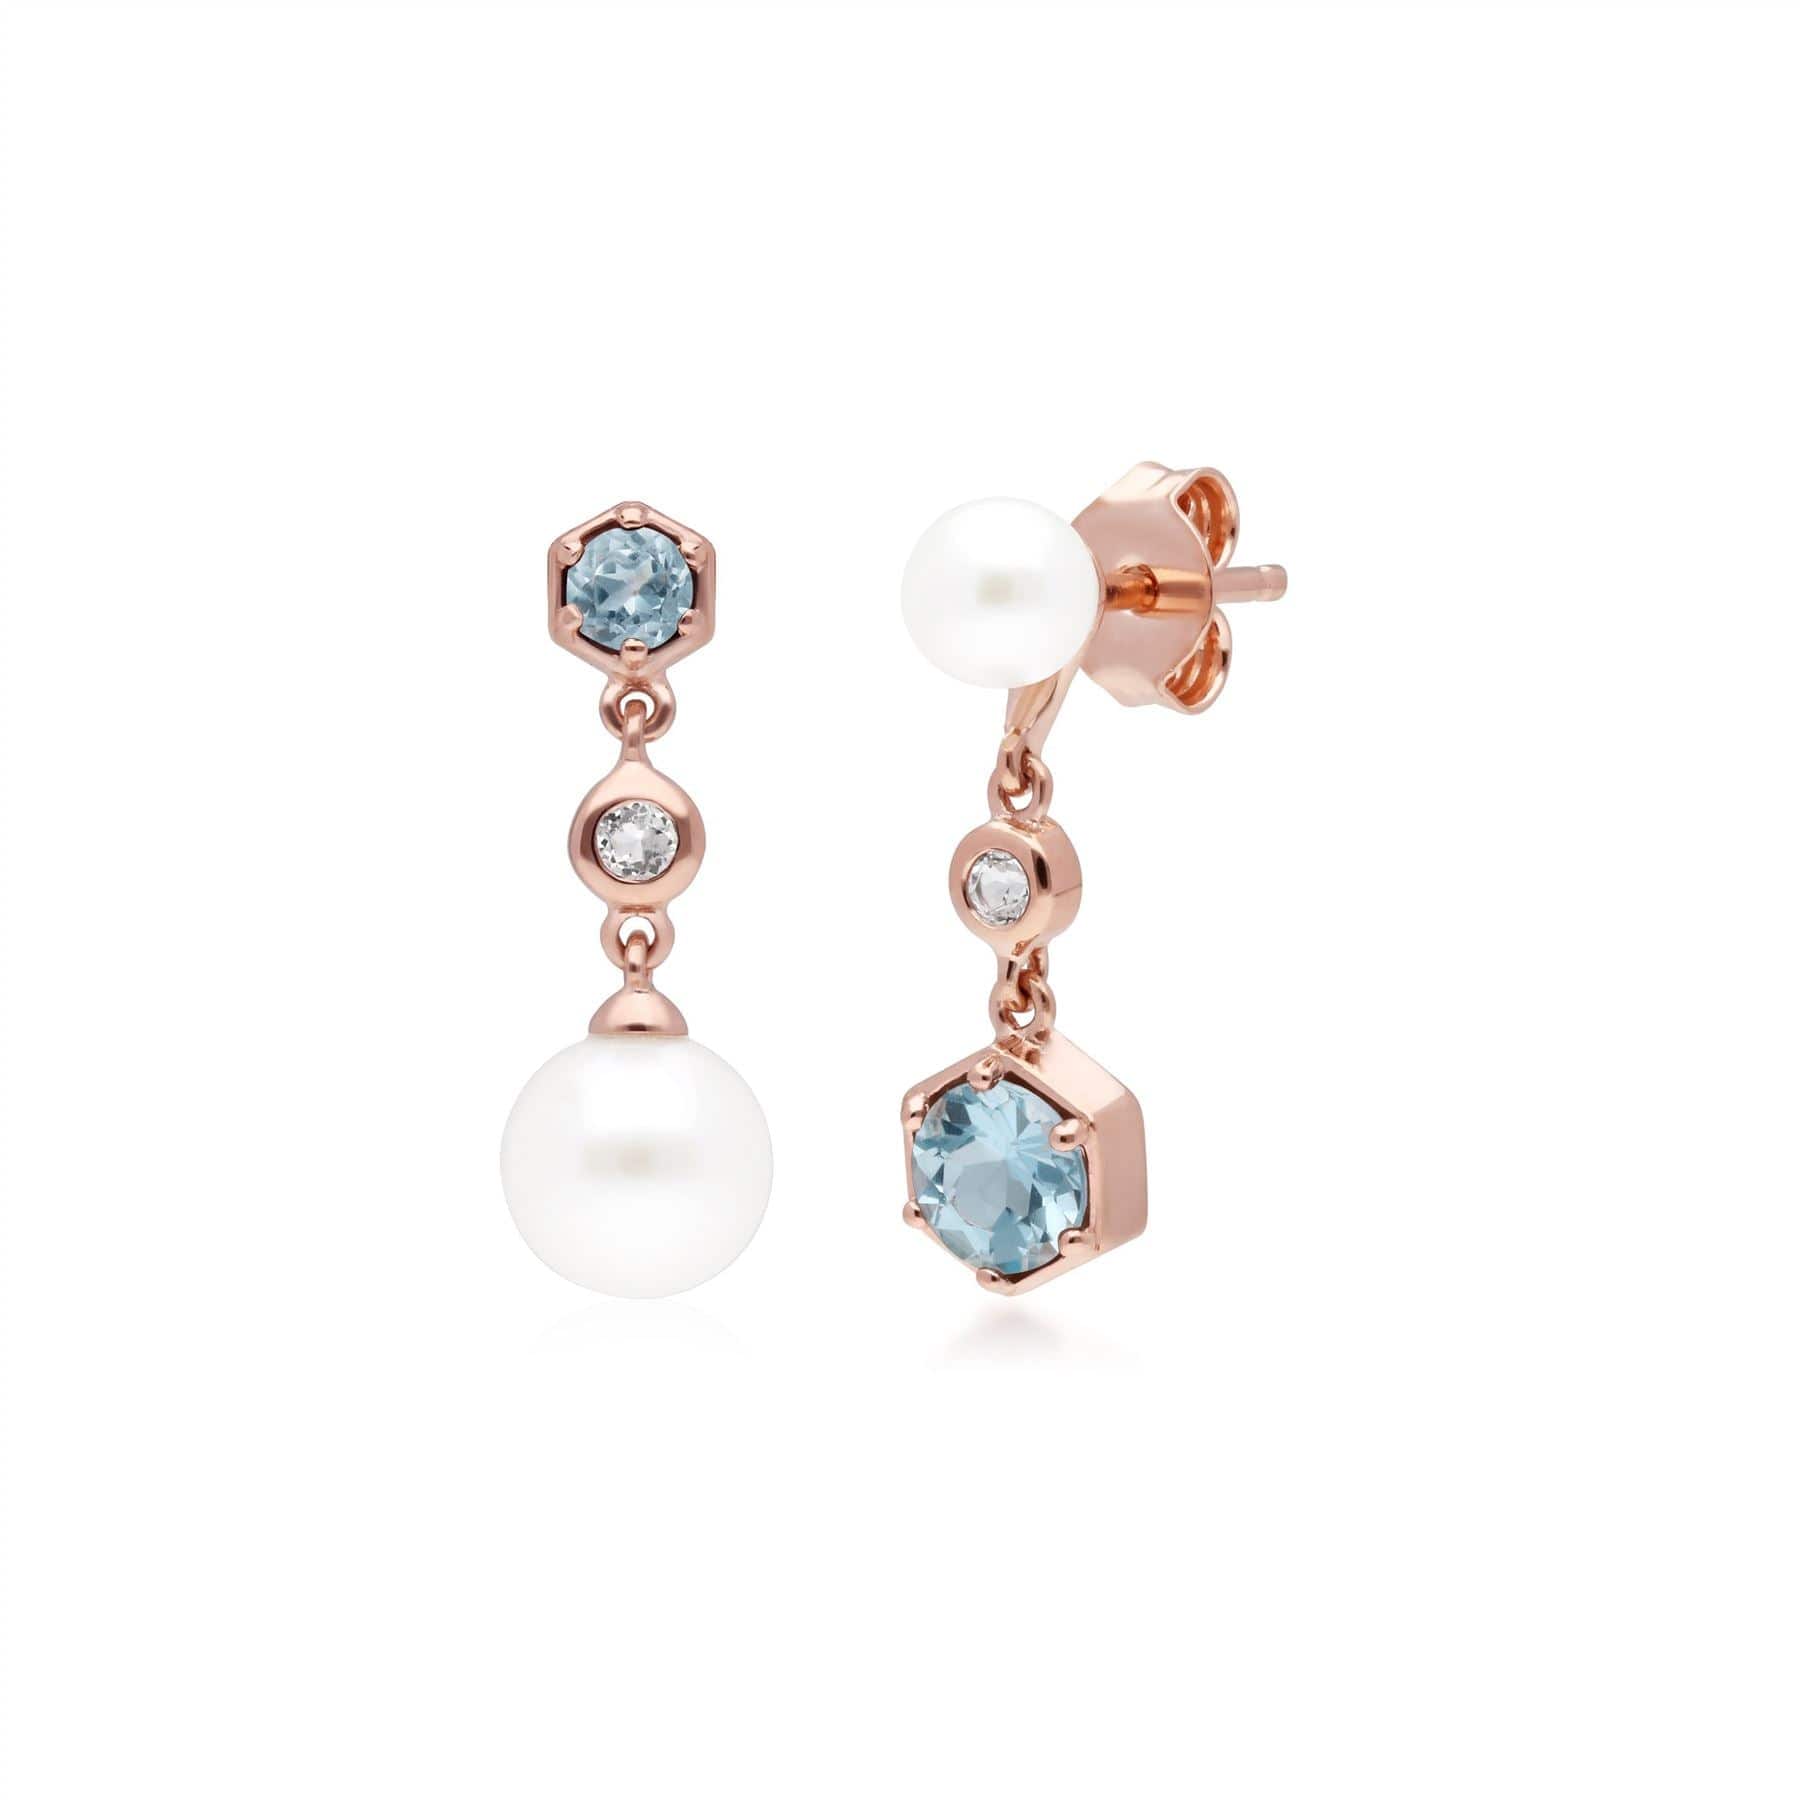 Modern Pearl, White & Blue Topaz Mismatched Drop Earrings in Rose Gold Plated Silver